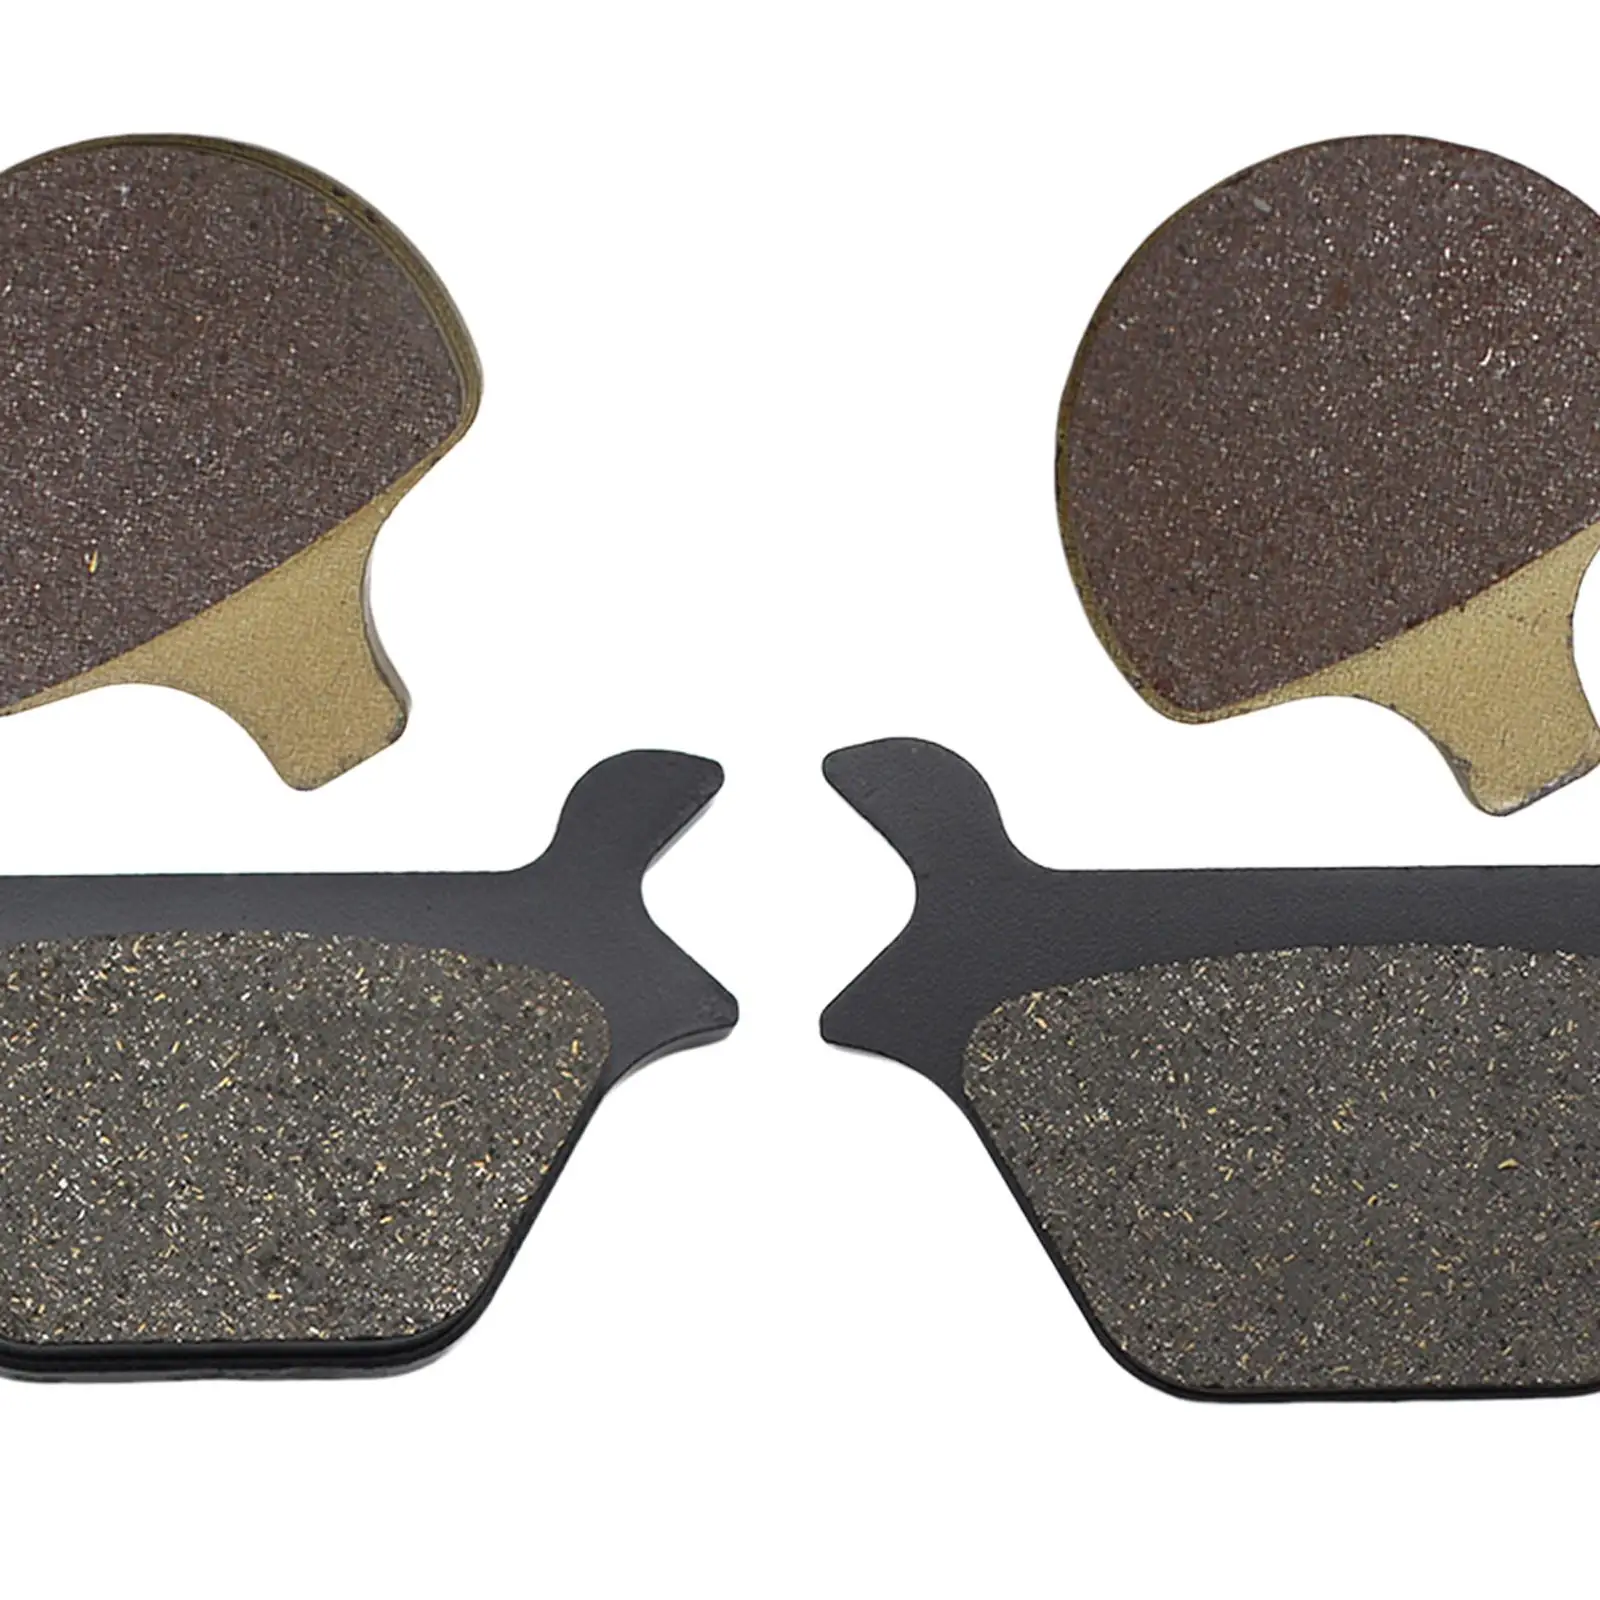 4 Pieces Motorcycle Front Rear Brake Pads for Fatboy Direct Replaces